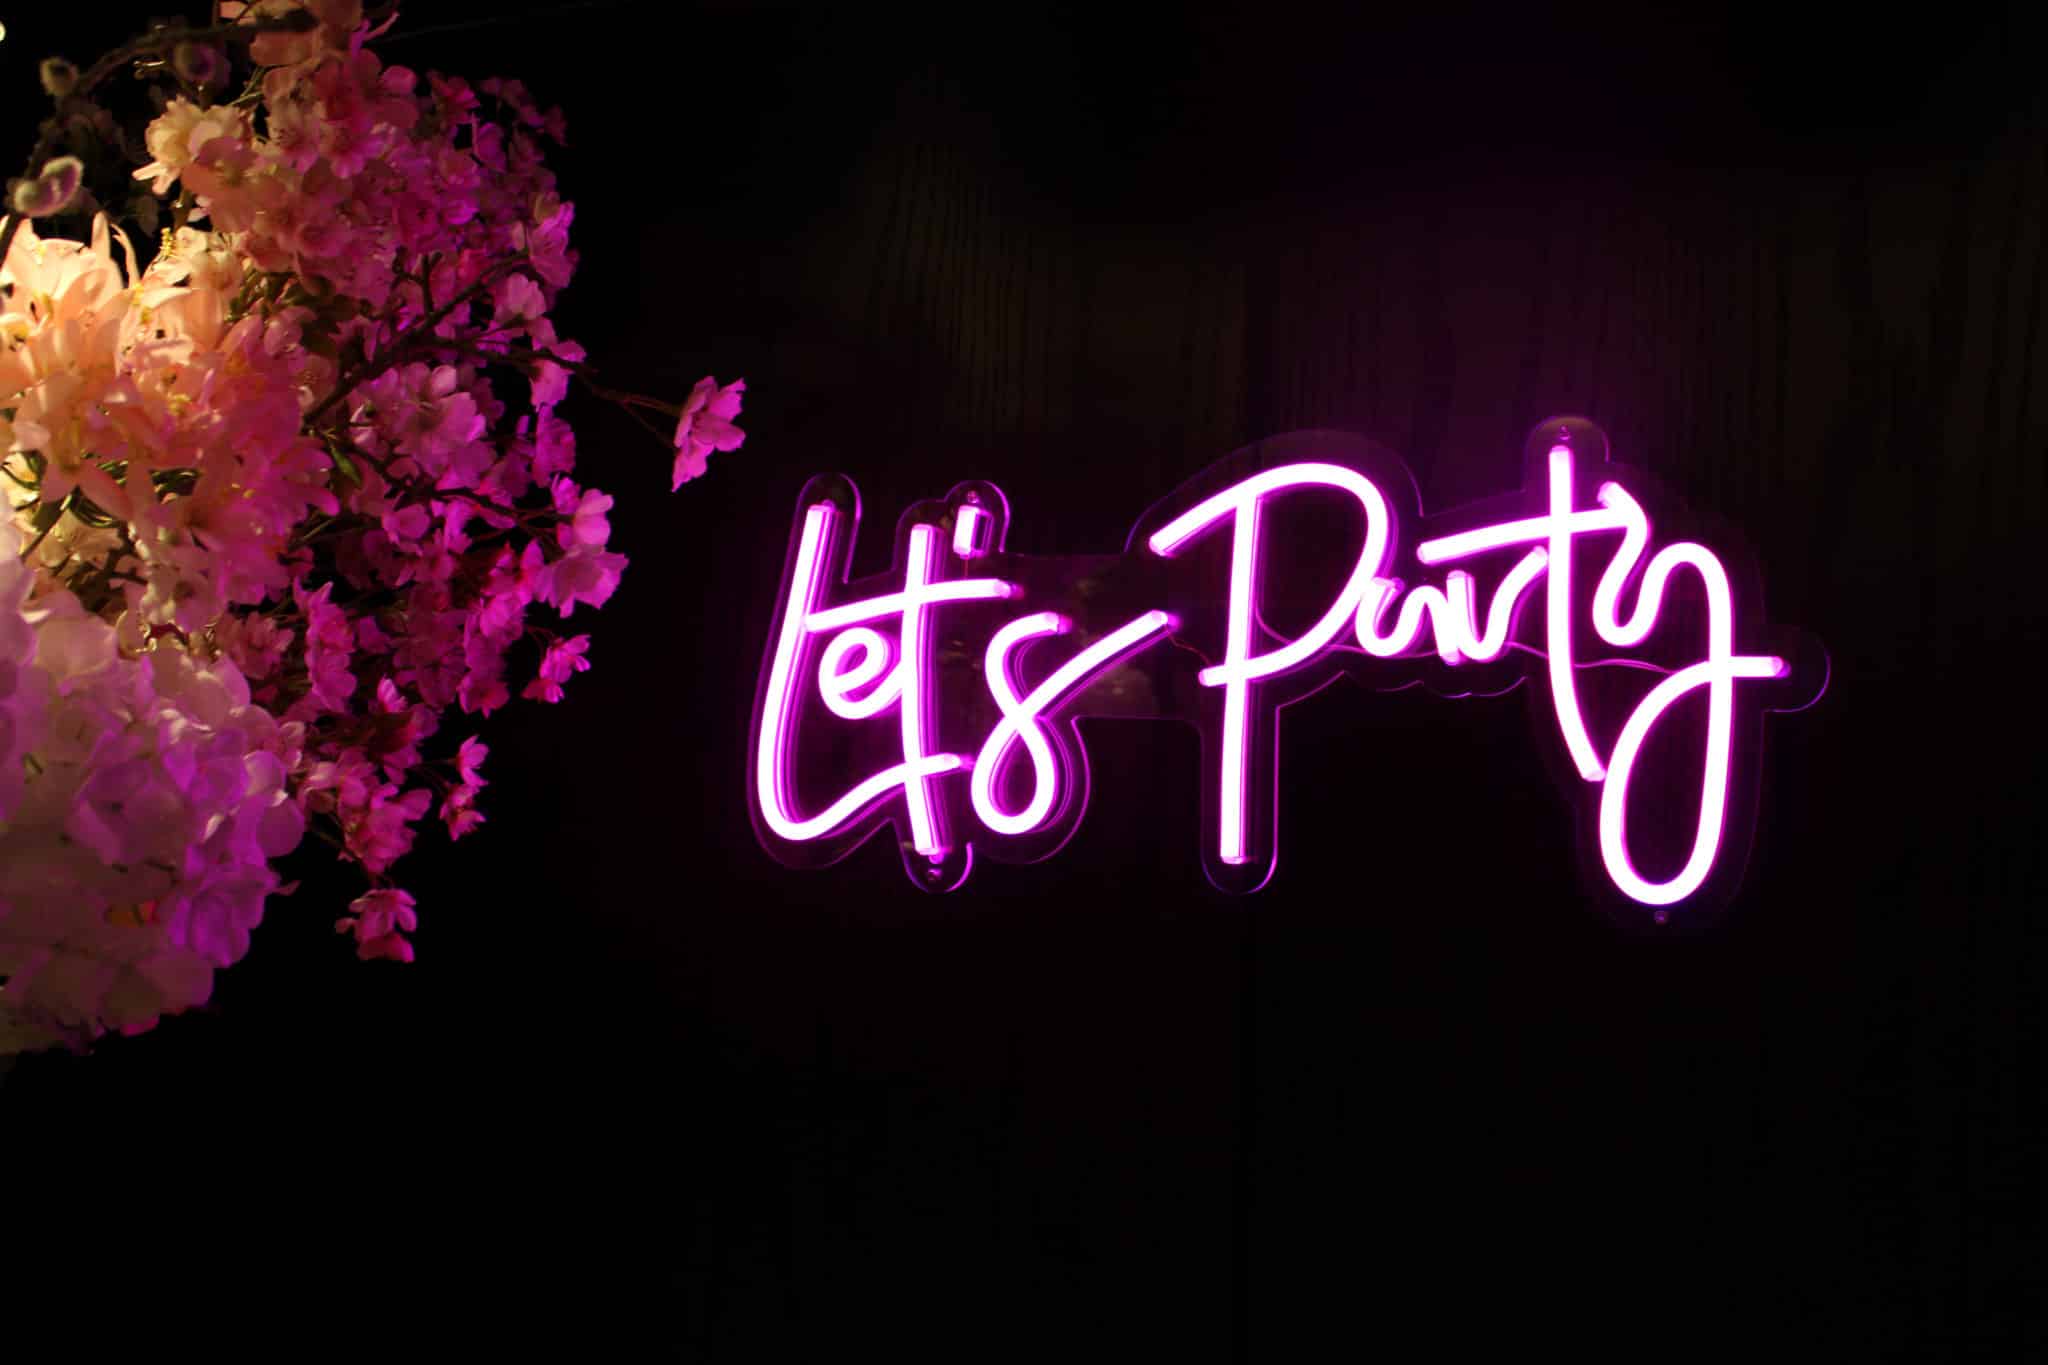 Neon lights spelling "Let's party"